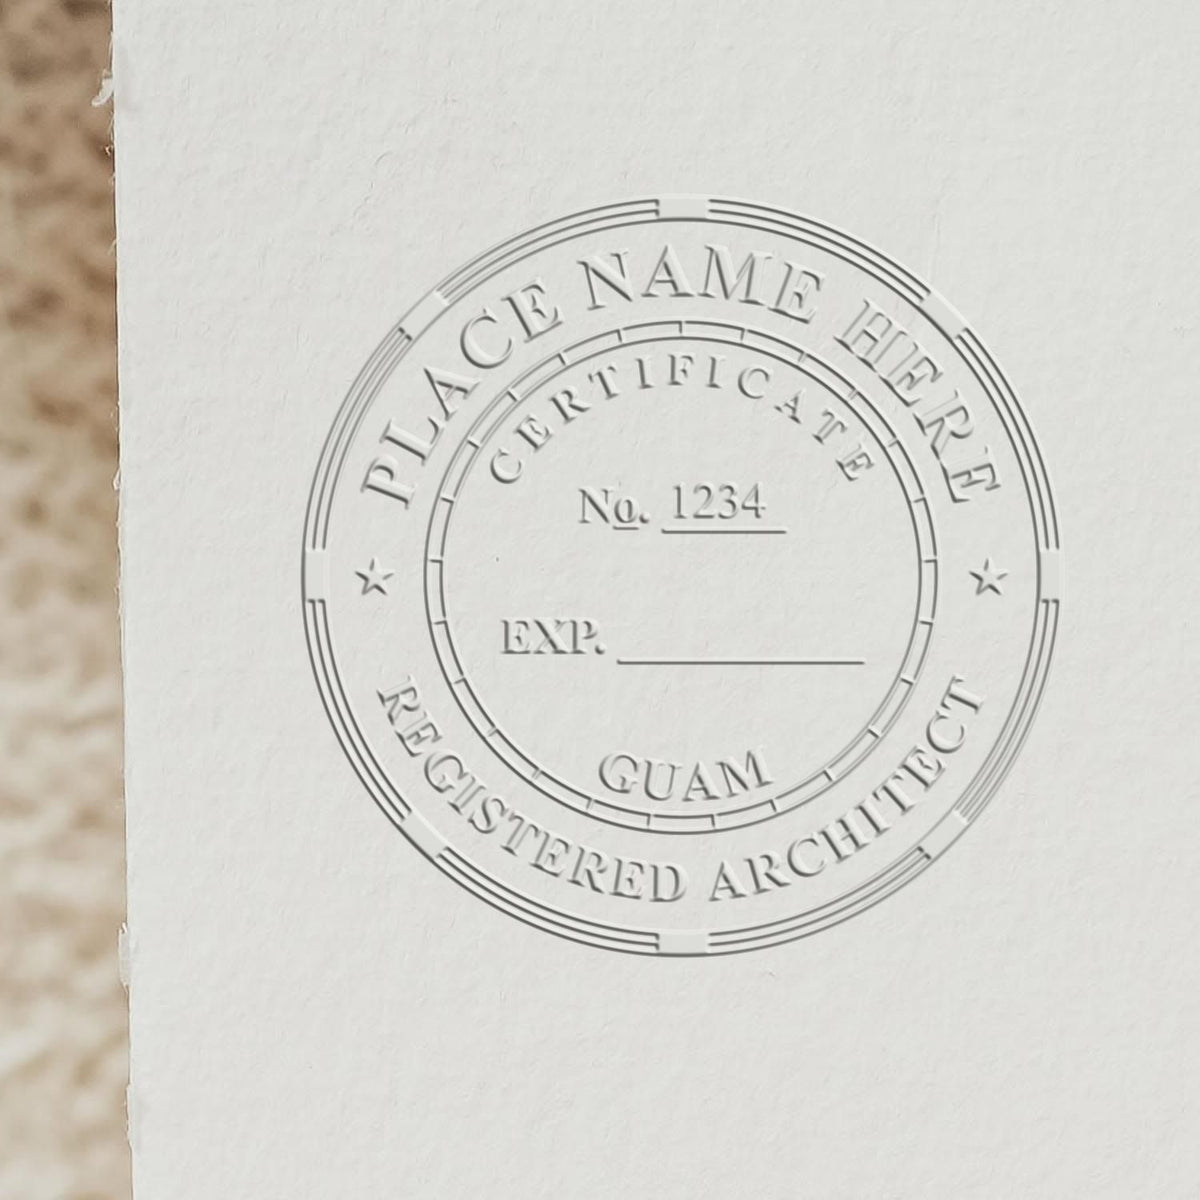 The State of Guam Architectural Seal Embosser stamp impression comes to life with a crisp, detailed photo on paper - showcasing true professional quality.